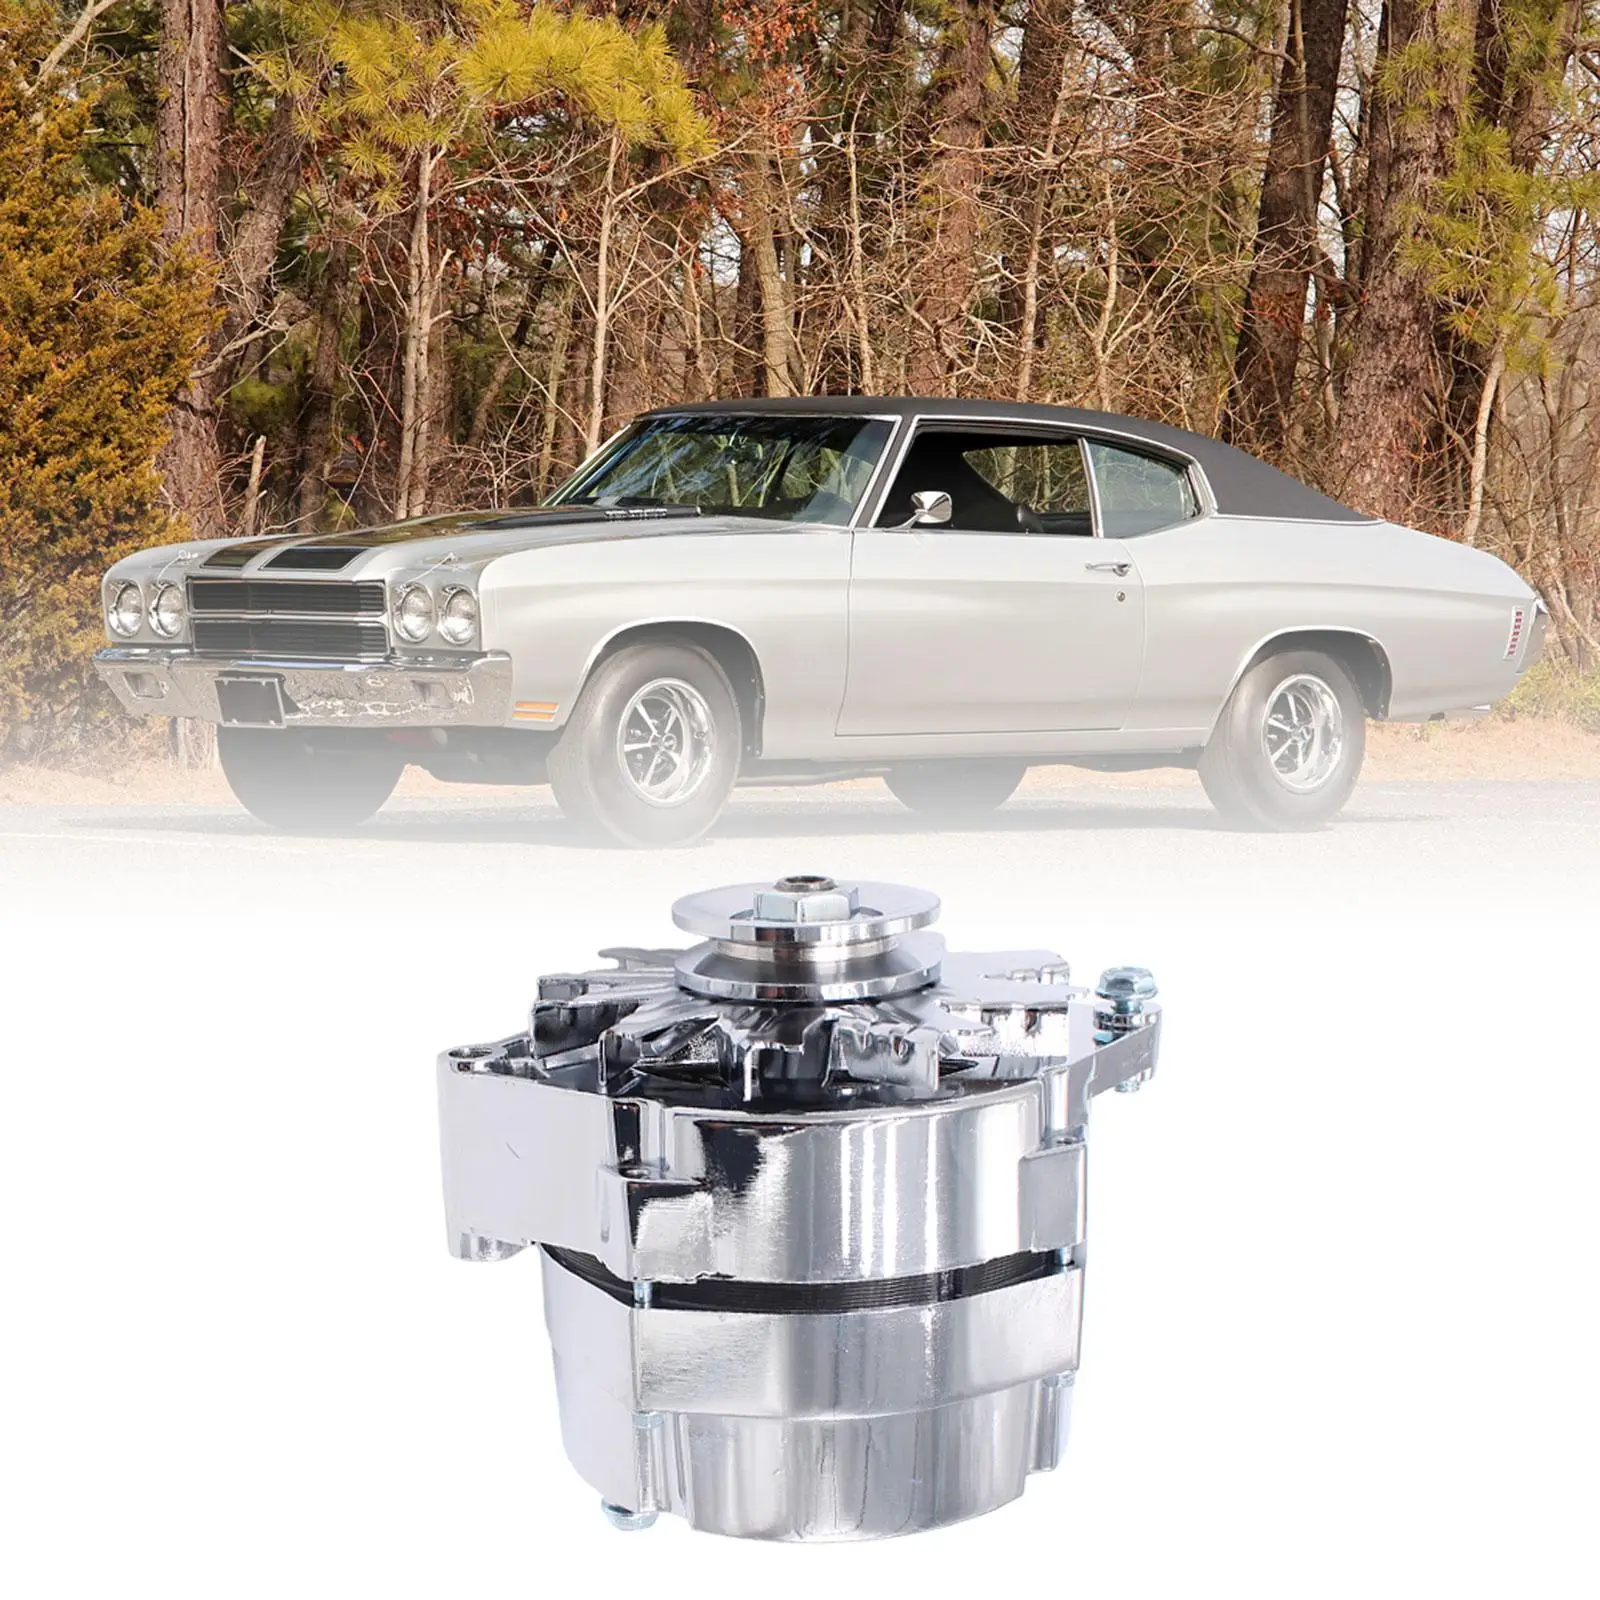 

Adr0335-c Alternator 110Amp Truck for 1 Wire Self Exciting Street Rods Easy to Install Clockwise Rotation for Jeep 1980-1982